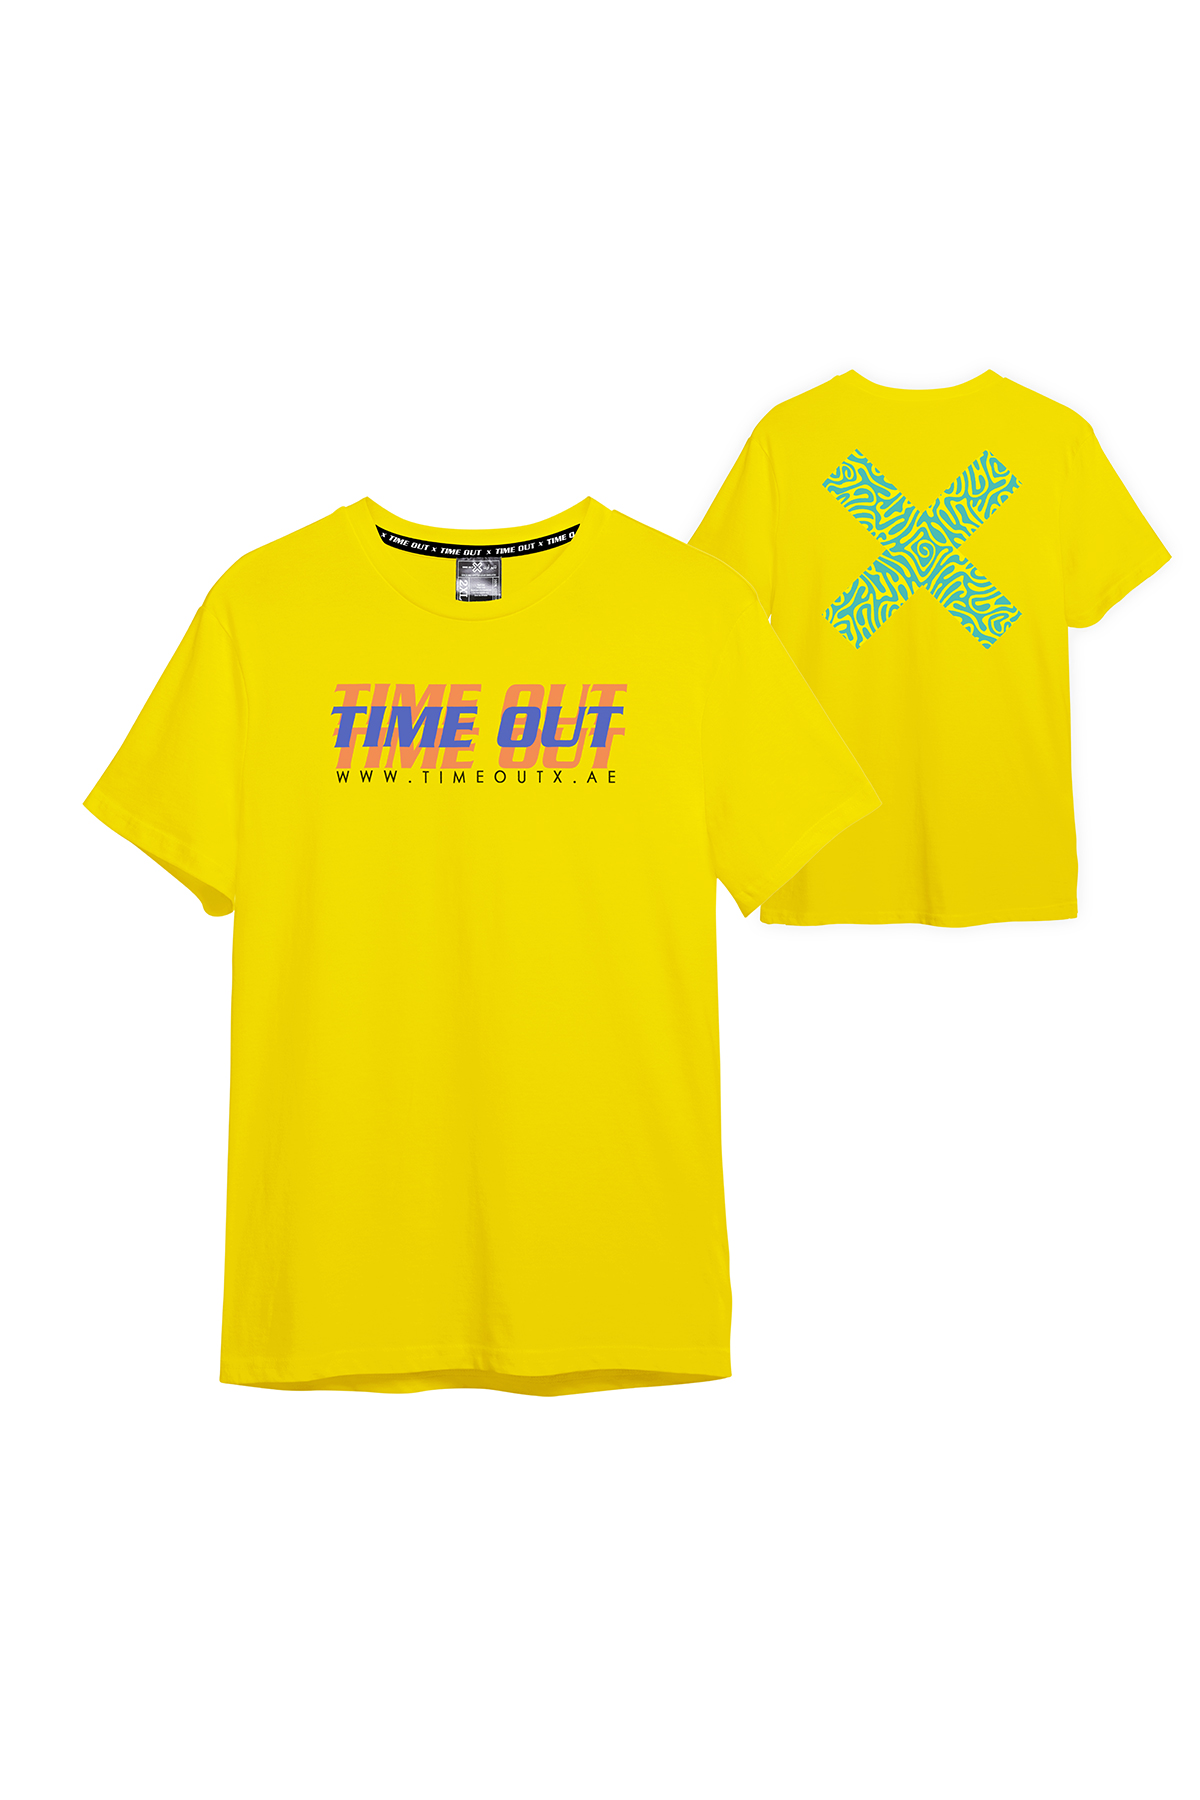 Unisex-Time-Out-X-Signature-Pure-Cotton-Yellow-Print-T-shirt-for-Kids—Both